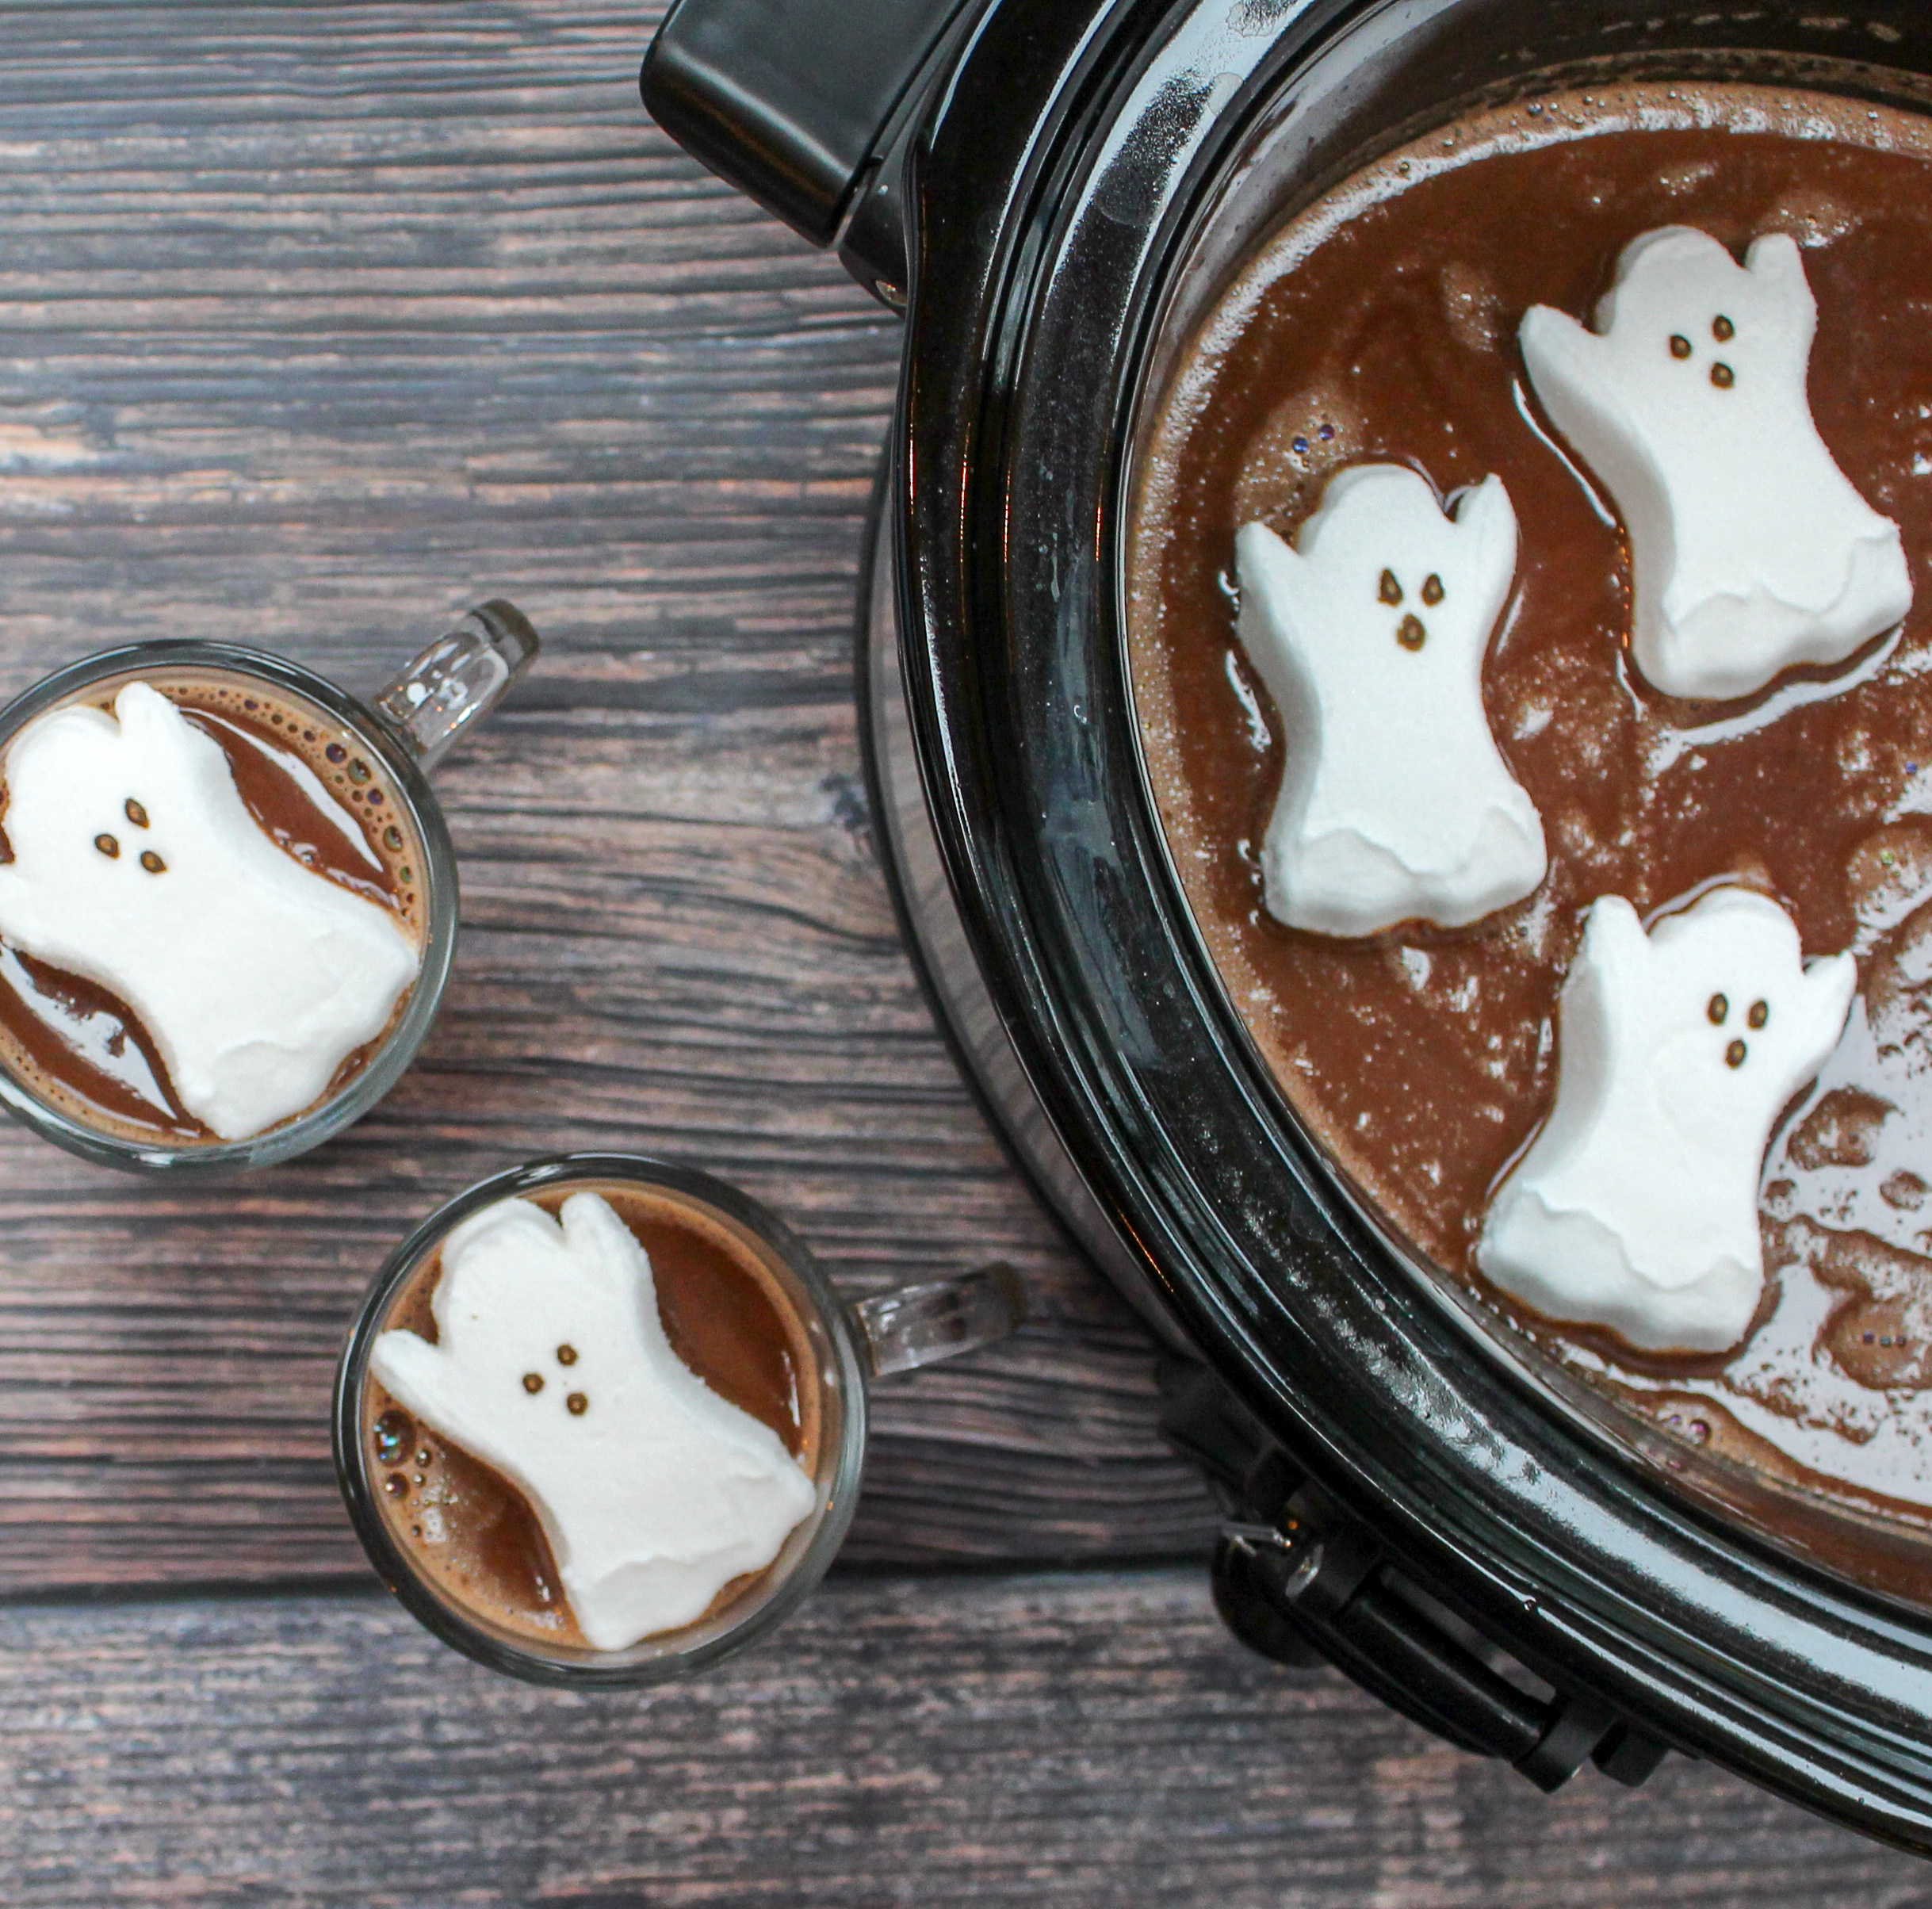 glasses filled with hot chocolate and topped with a ghost shaped marshmallow